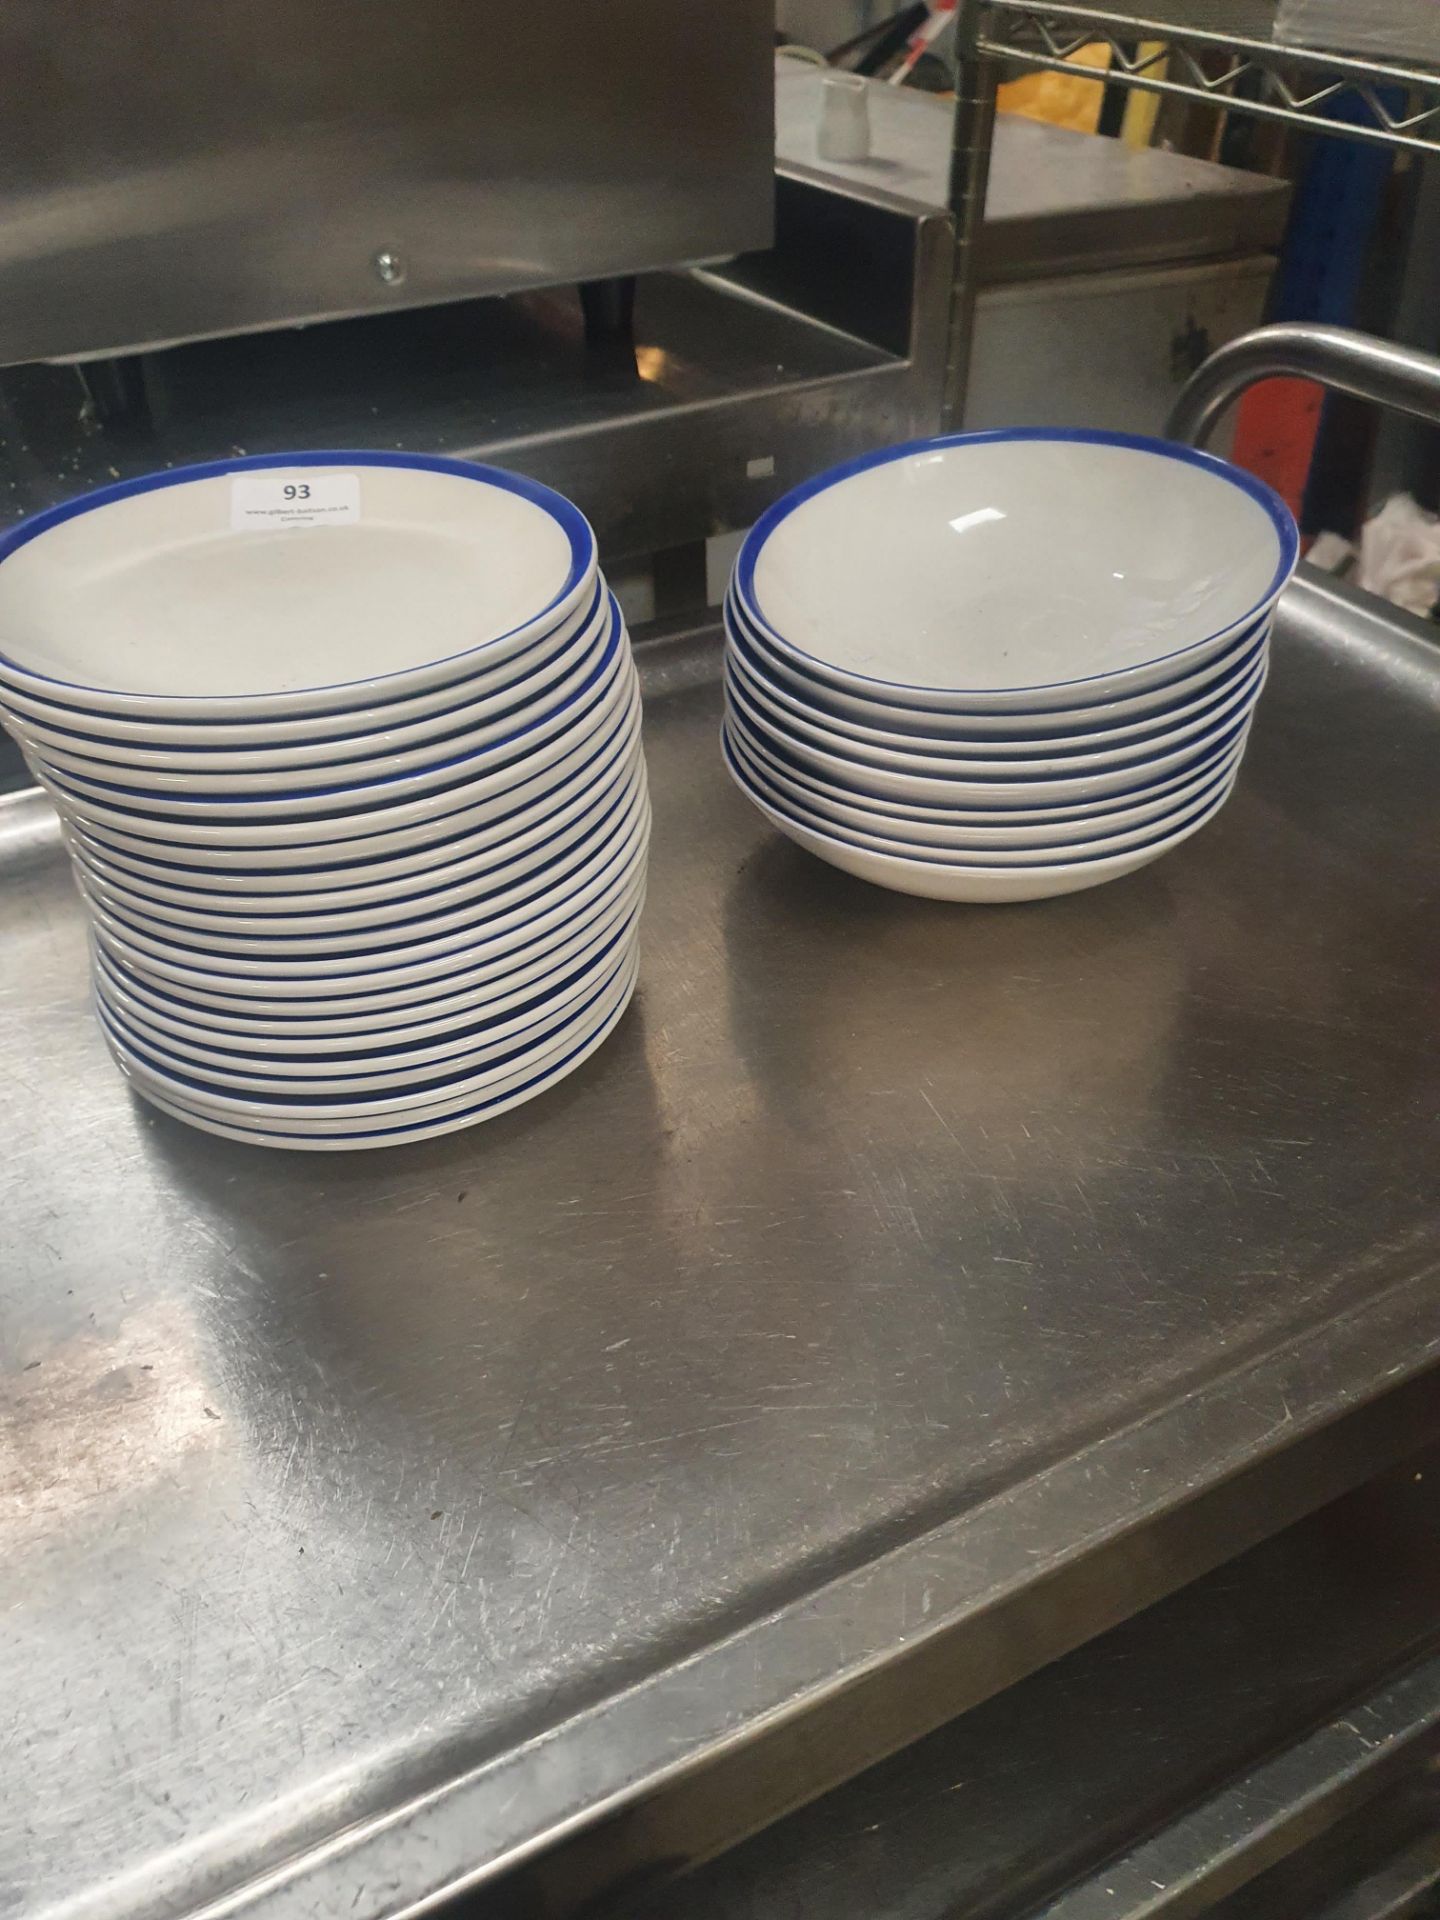 * approx 20 x plates and 10 x bowls with blue rim